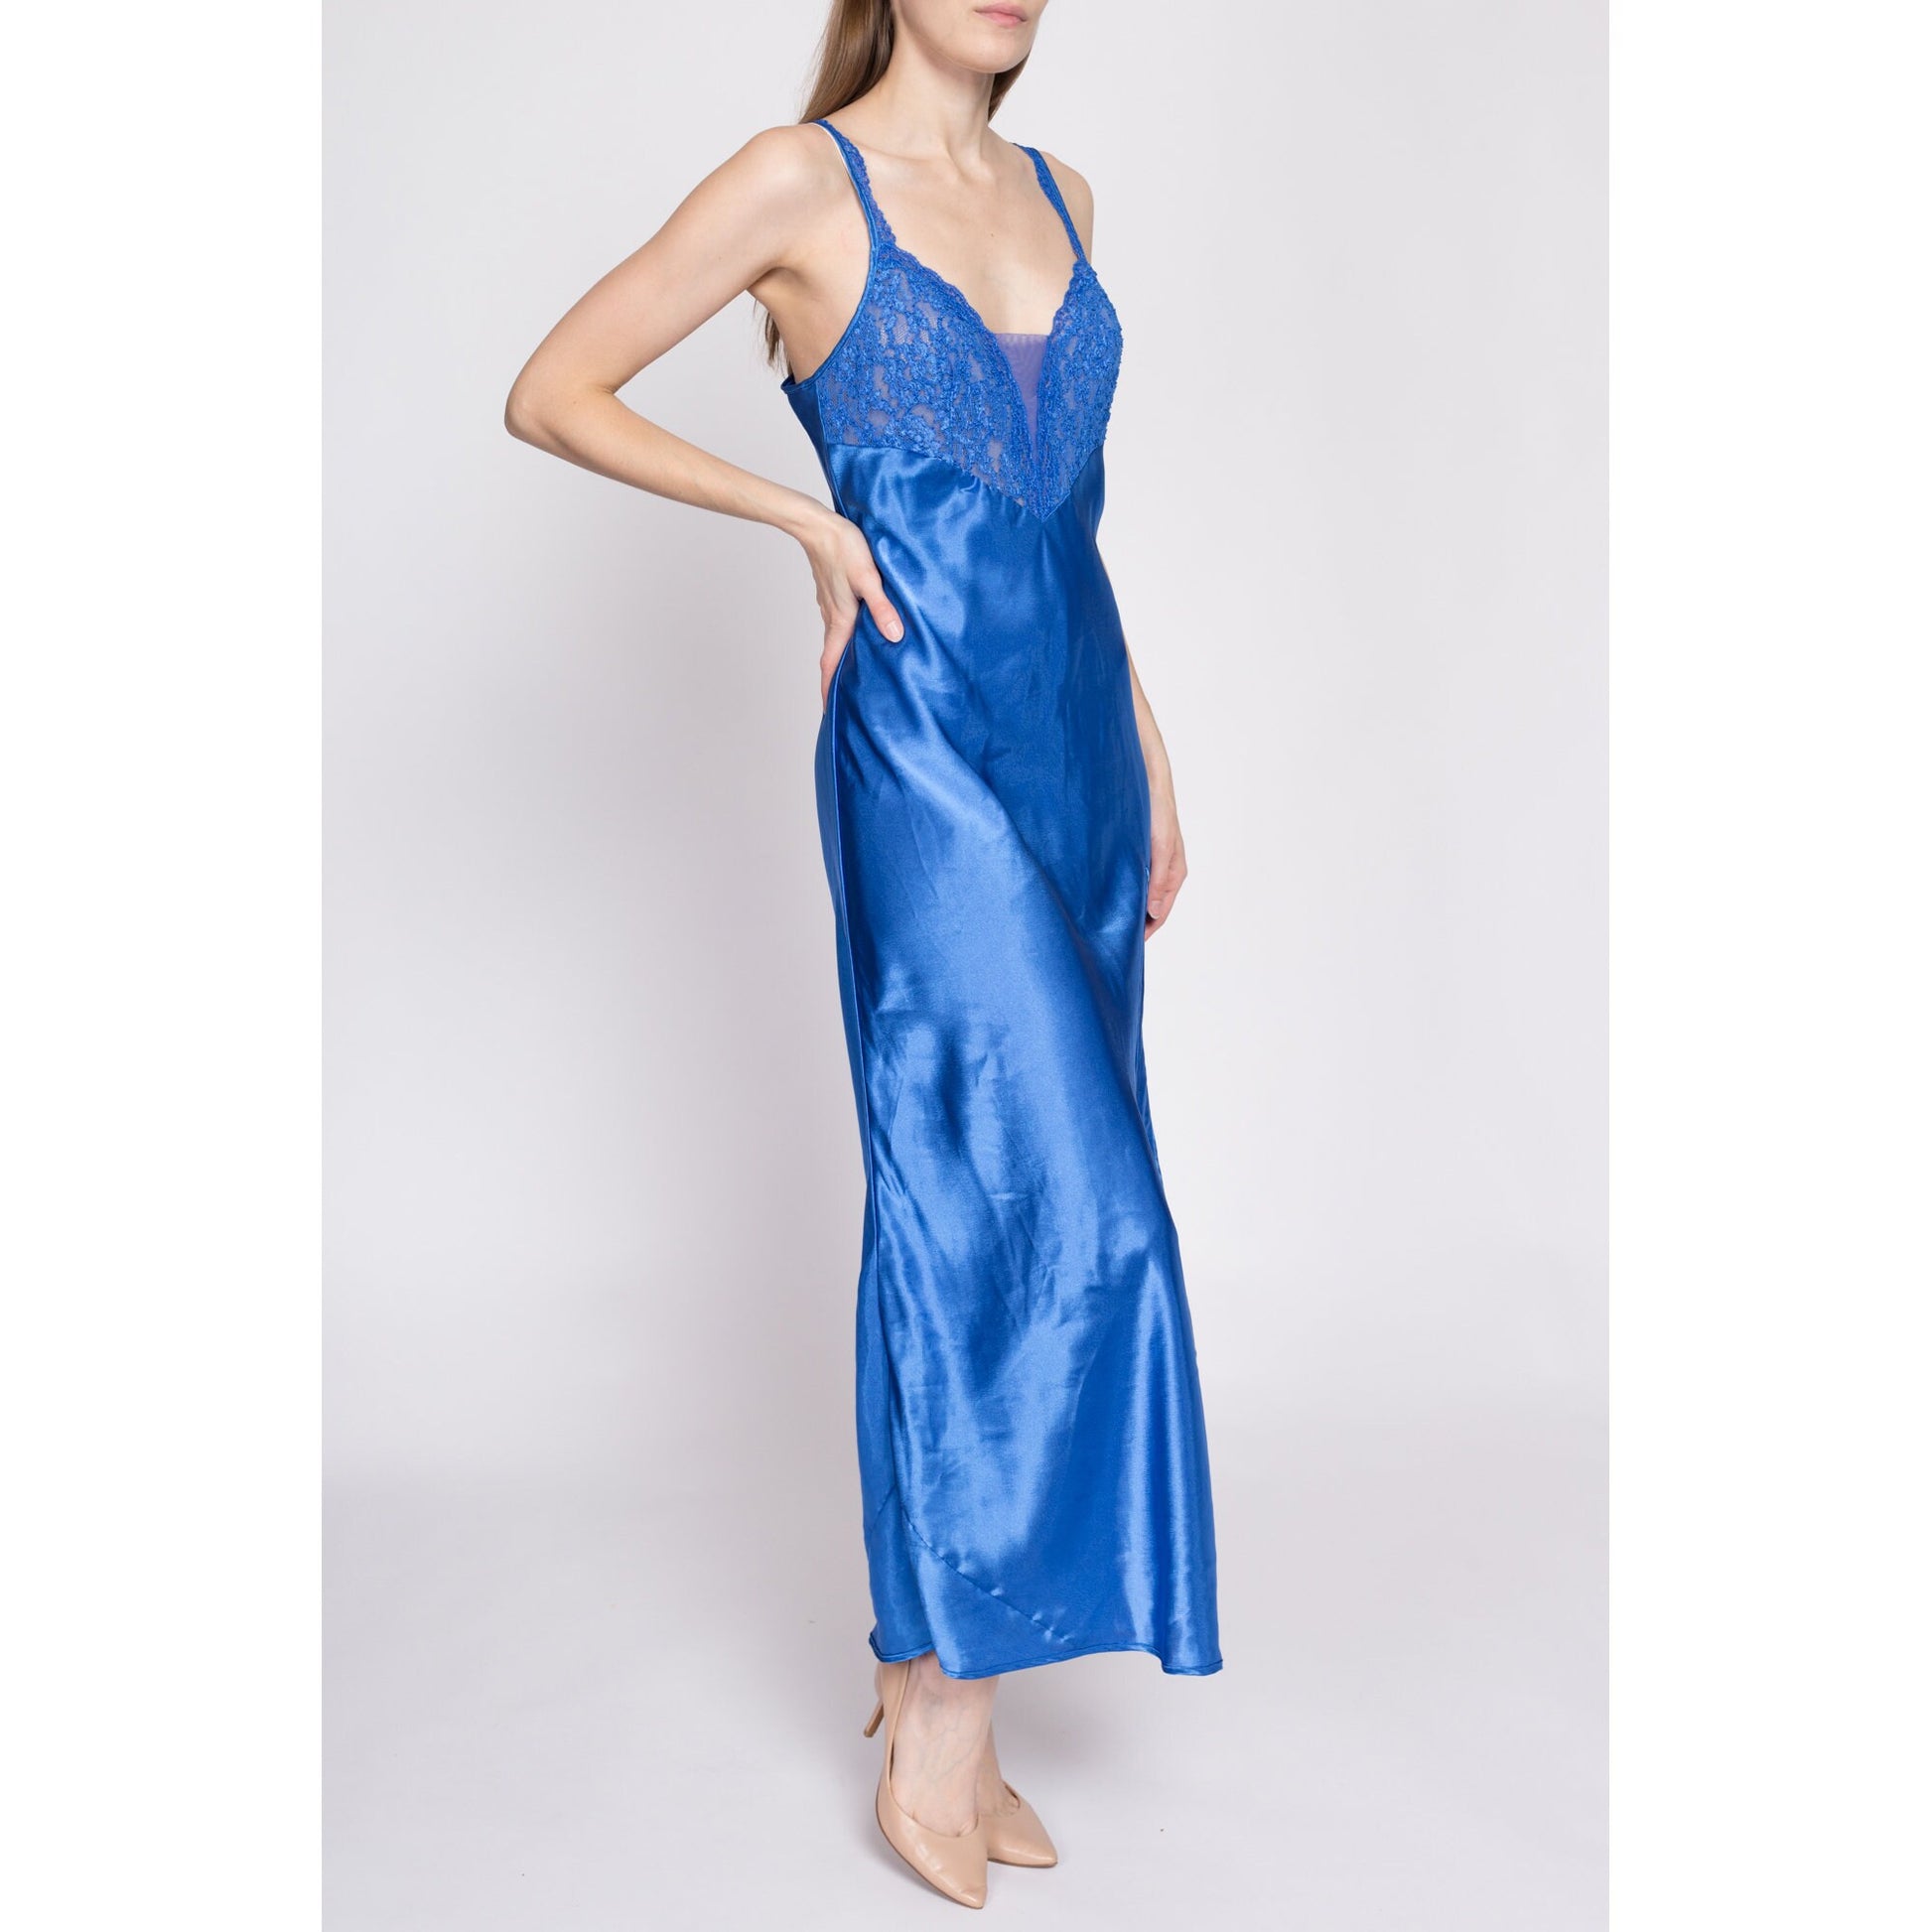 80s Victoria's Secret Blue Satin Nightgown - Small – Flying Apple Vintage